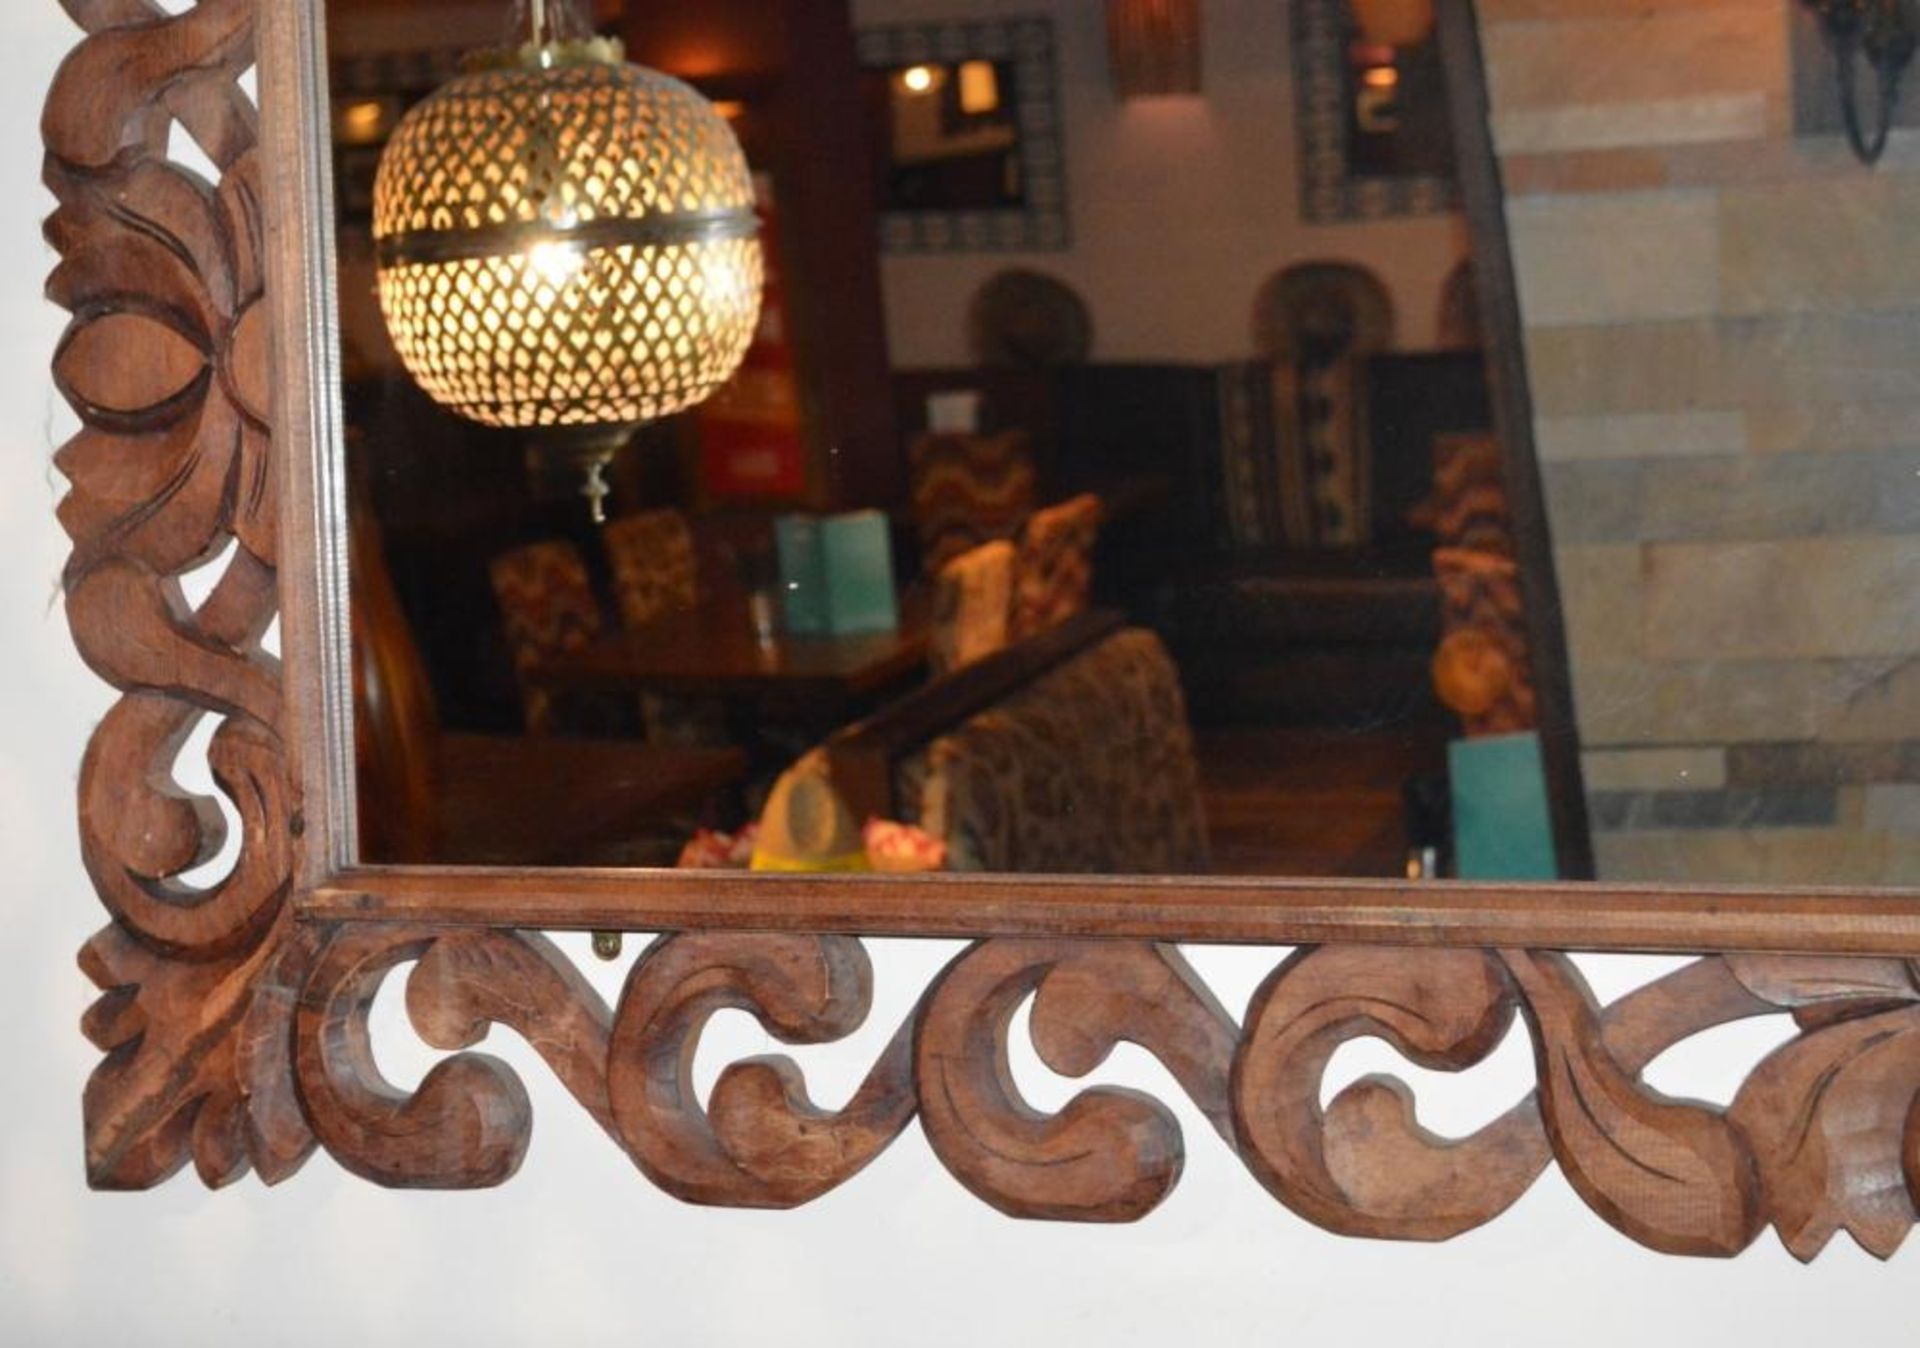 1 x Large Rectangular Wall Mirror With An Ornate Carved Wooden Frame - Dimensions (approx): Height - Image 3 of 3